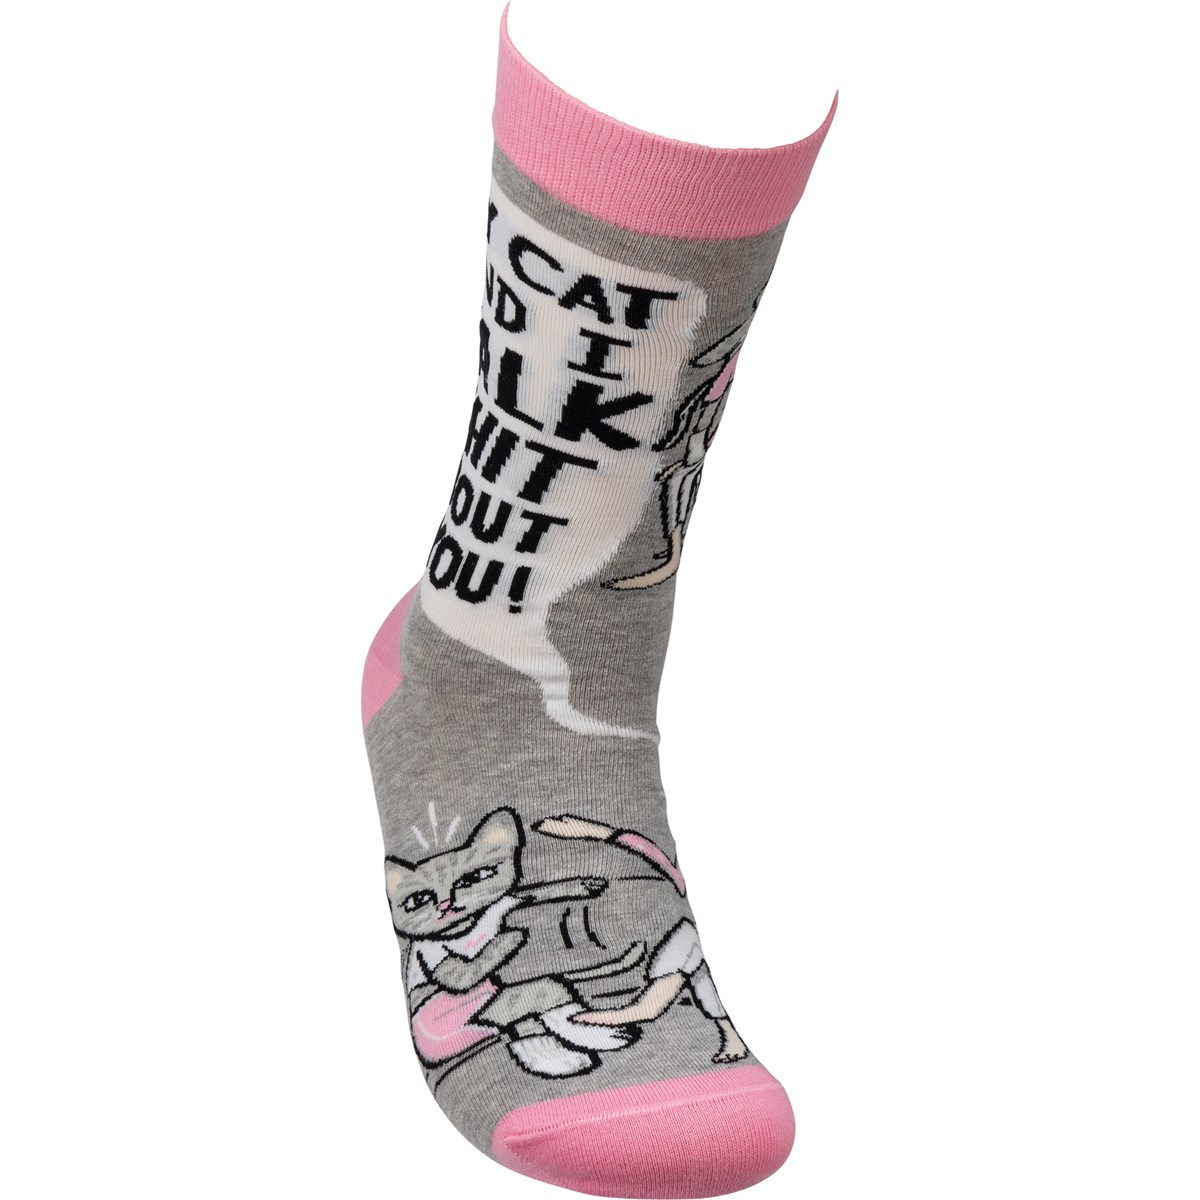 Socks - My Cat And I Talk About You - One Size Fits Most - Cotton, Nylon, Spandex